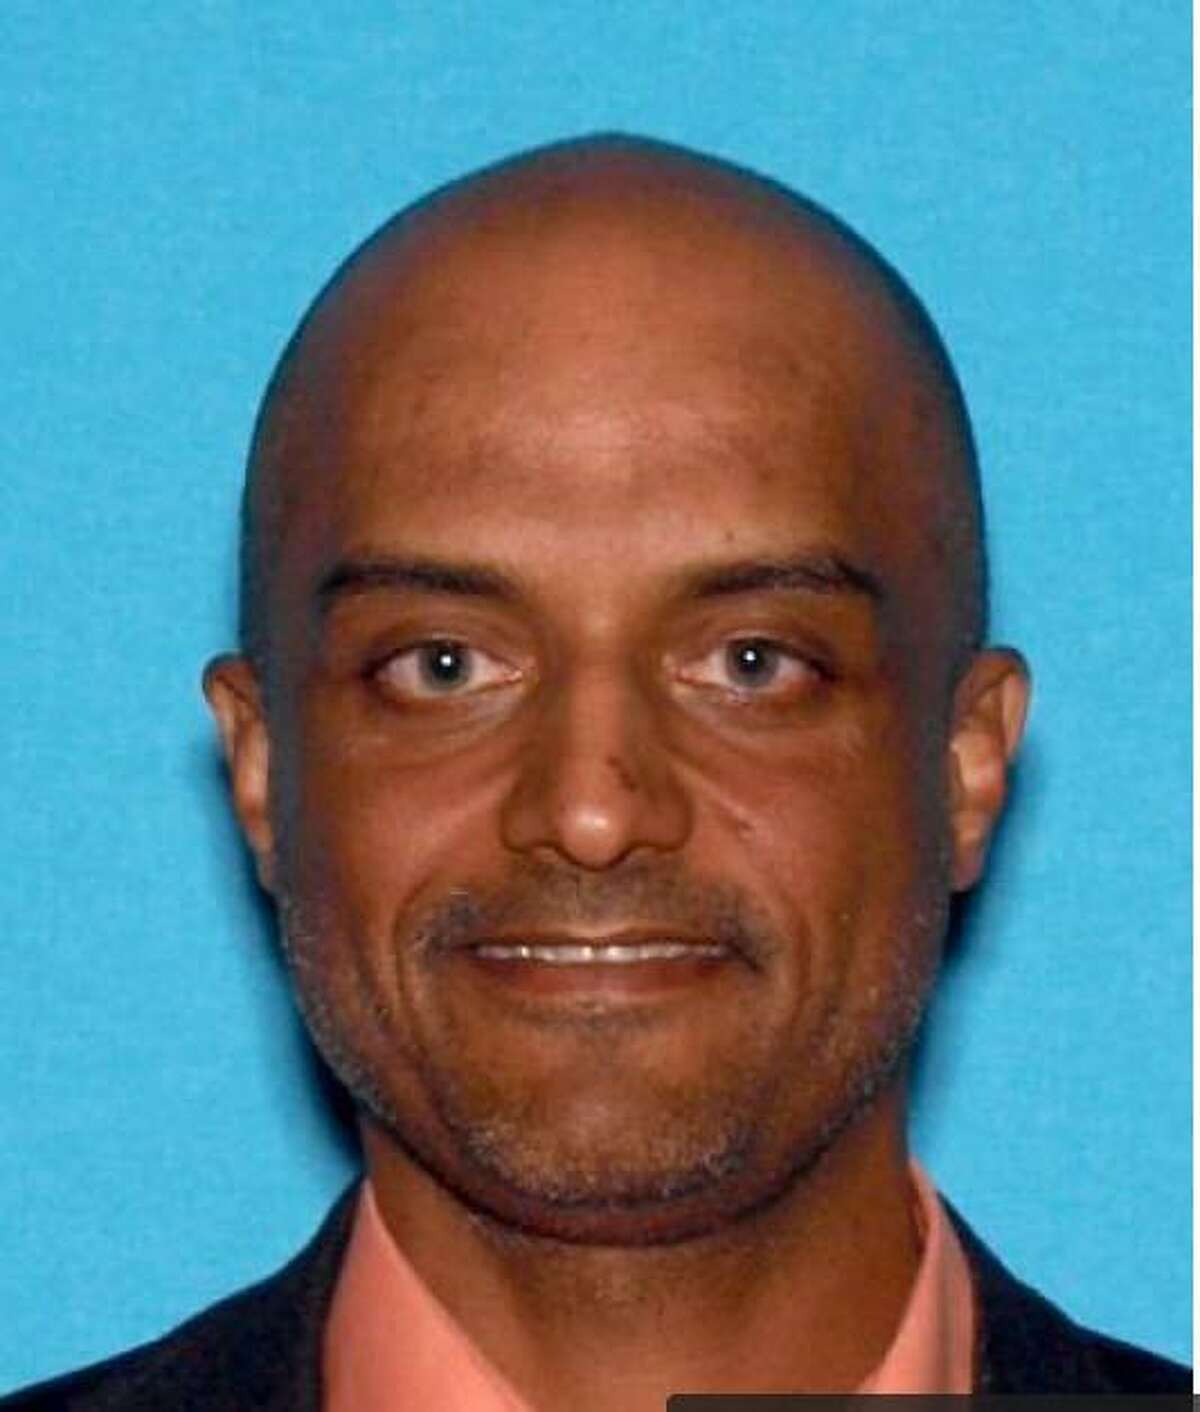 Santa Cruz County sheriff's officials said Tushar Atre was kidnapped from his home around 3 a.m. Tuesday. A body and a car associated with the case was found, and authorities later identified the located victim as Atre.